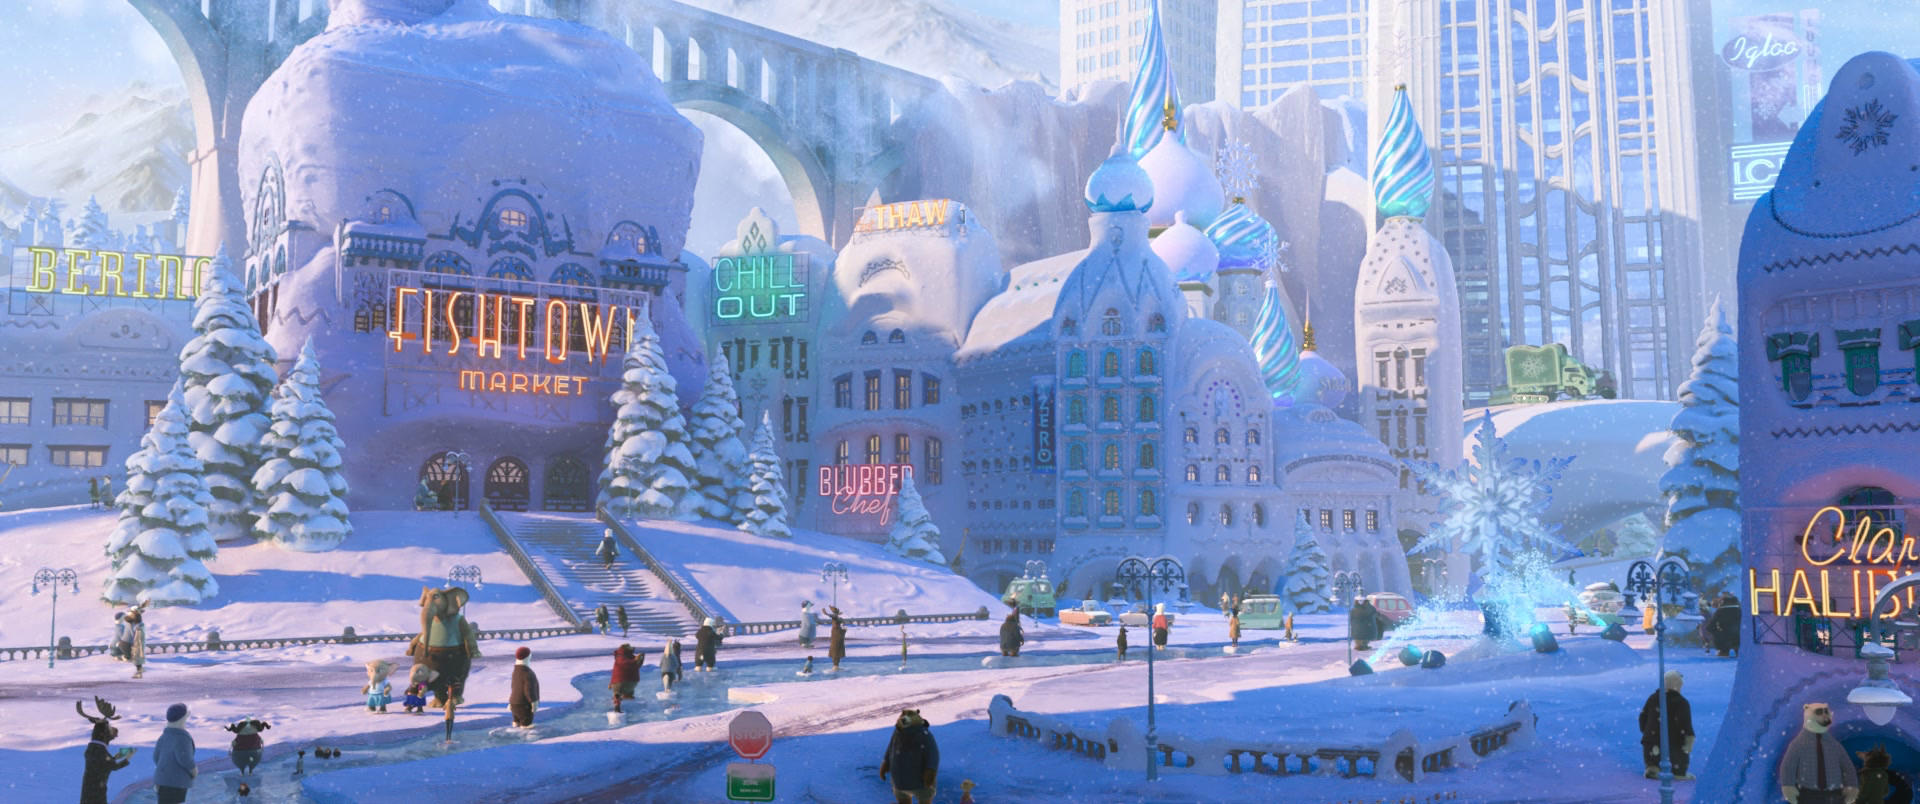 ZOOTOPIA – Easter Egg: Elephant girls wearing FROZEN Anna and Elsa outfits. ©2016 Disney. All Rights Reserved.